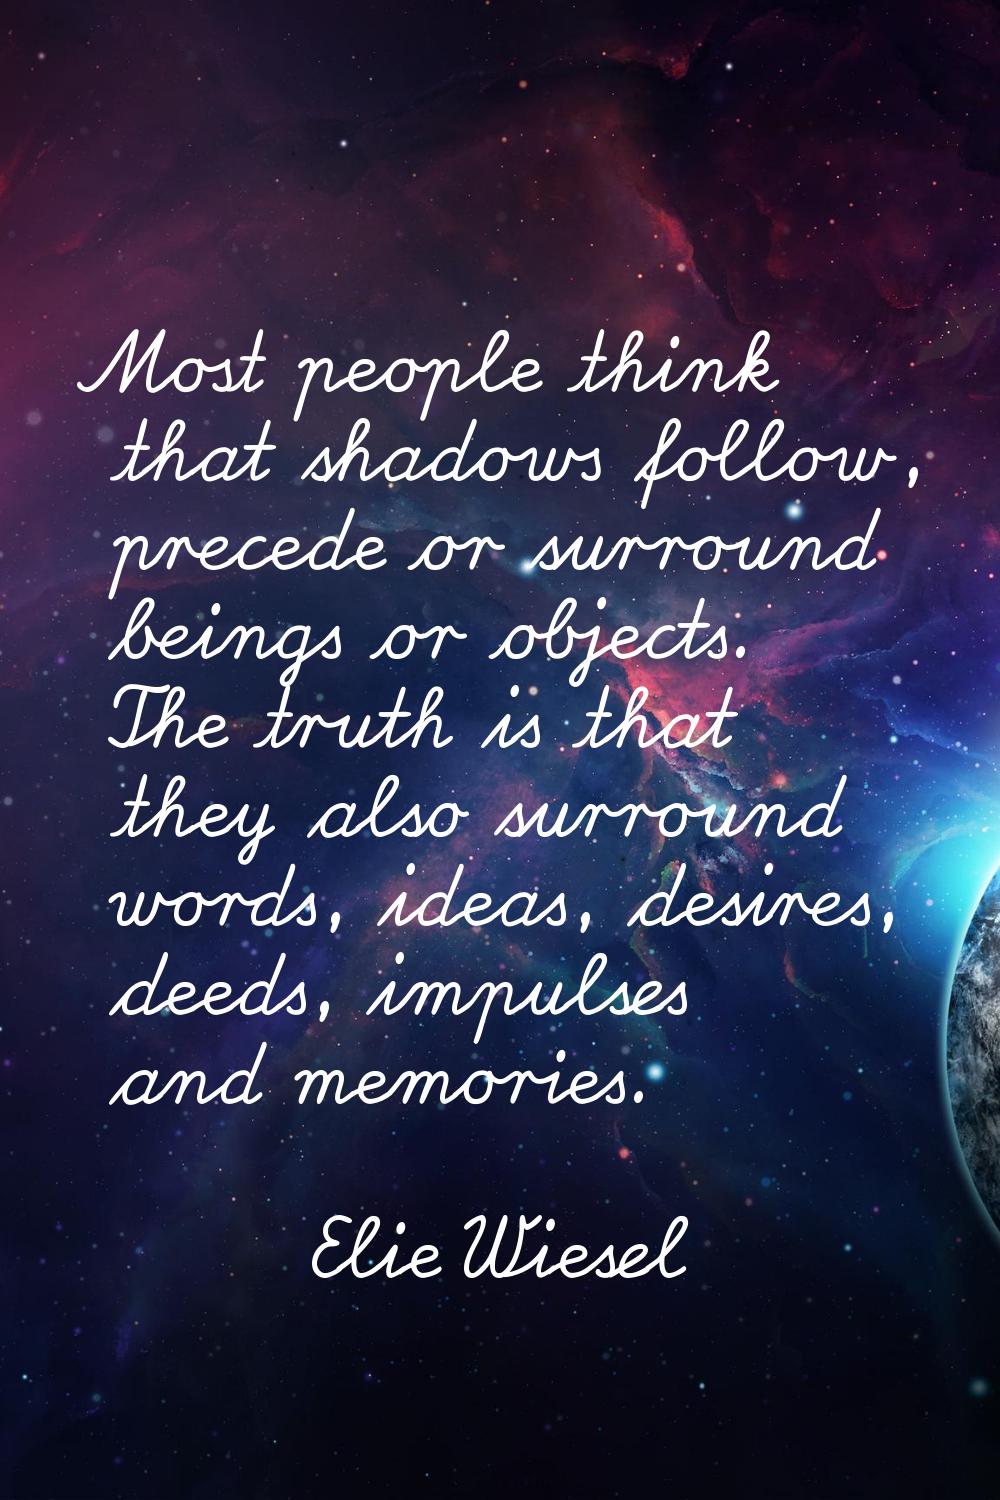 Most people think that shadows follow, precede or surround beings or objects. The truth is that the